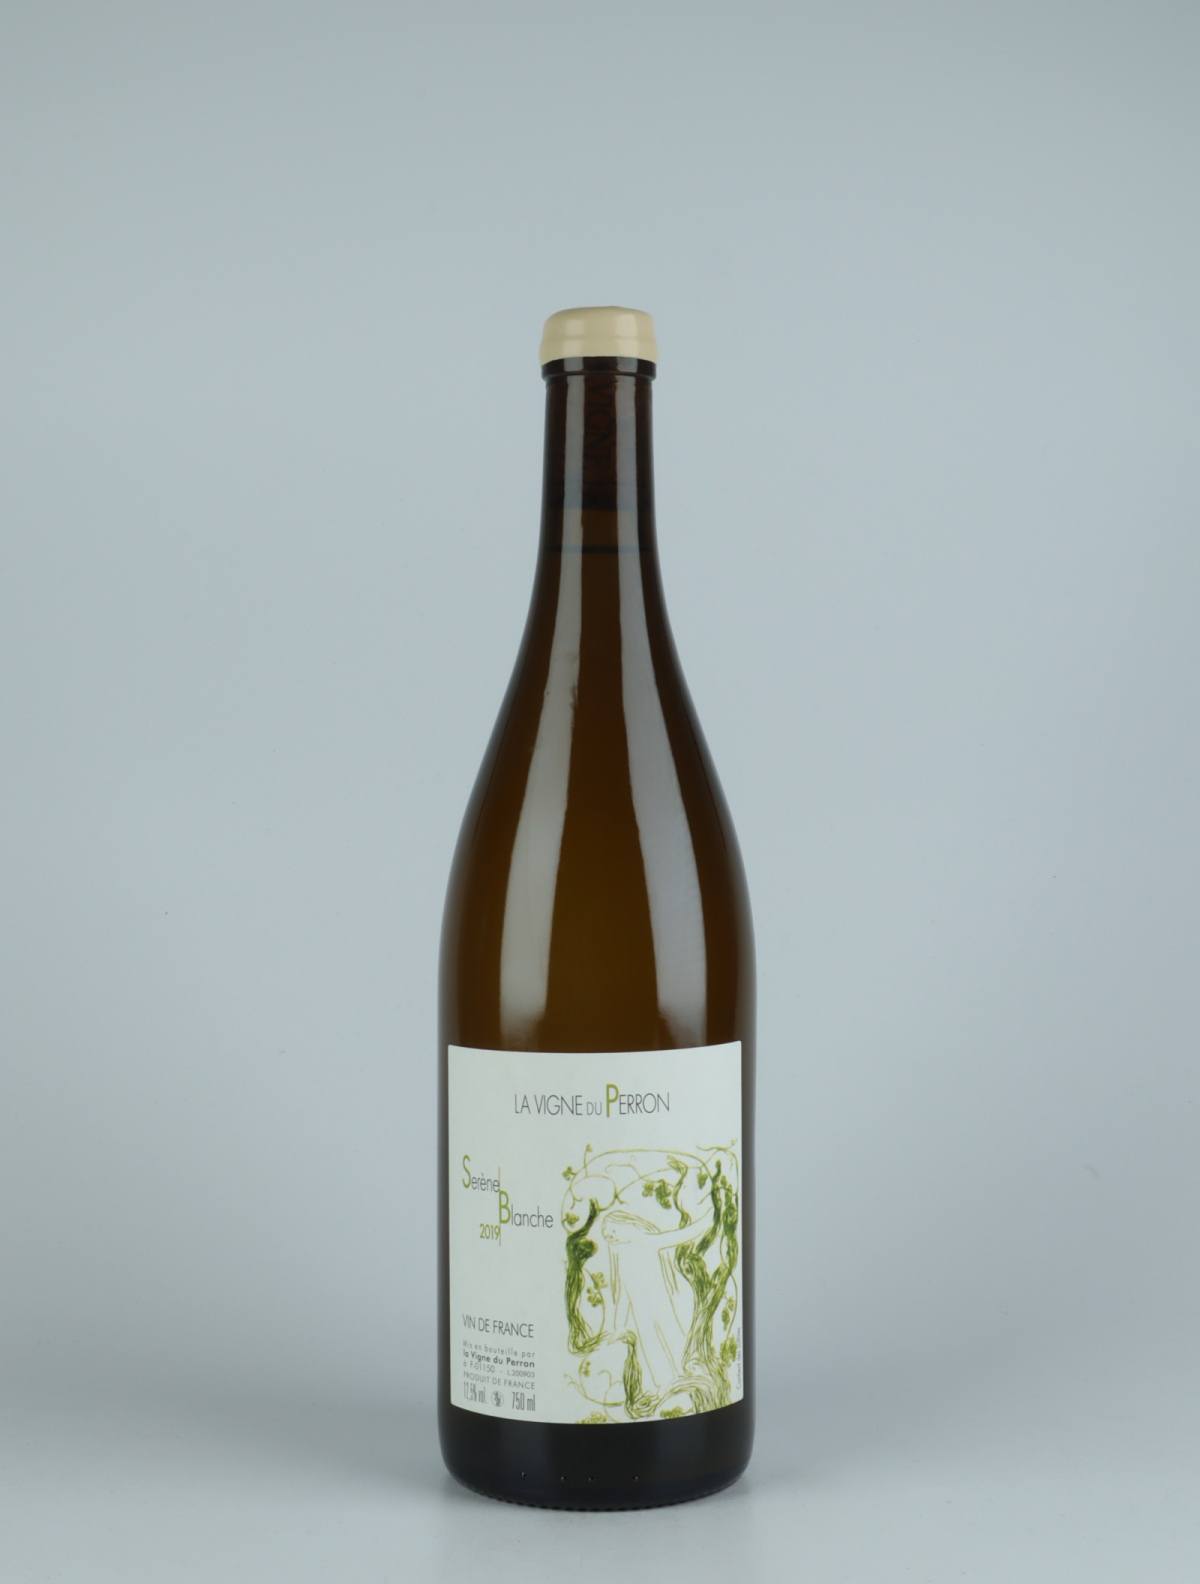 A bottle 2019 Sérène Blanche White wine from Domaine du Perron, Bugey in France